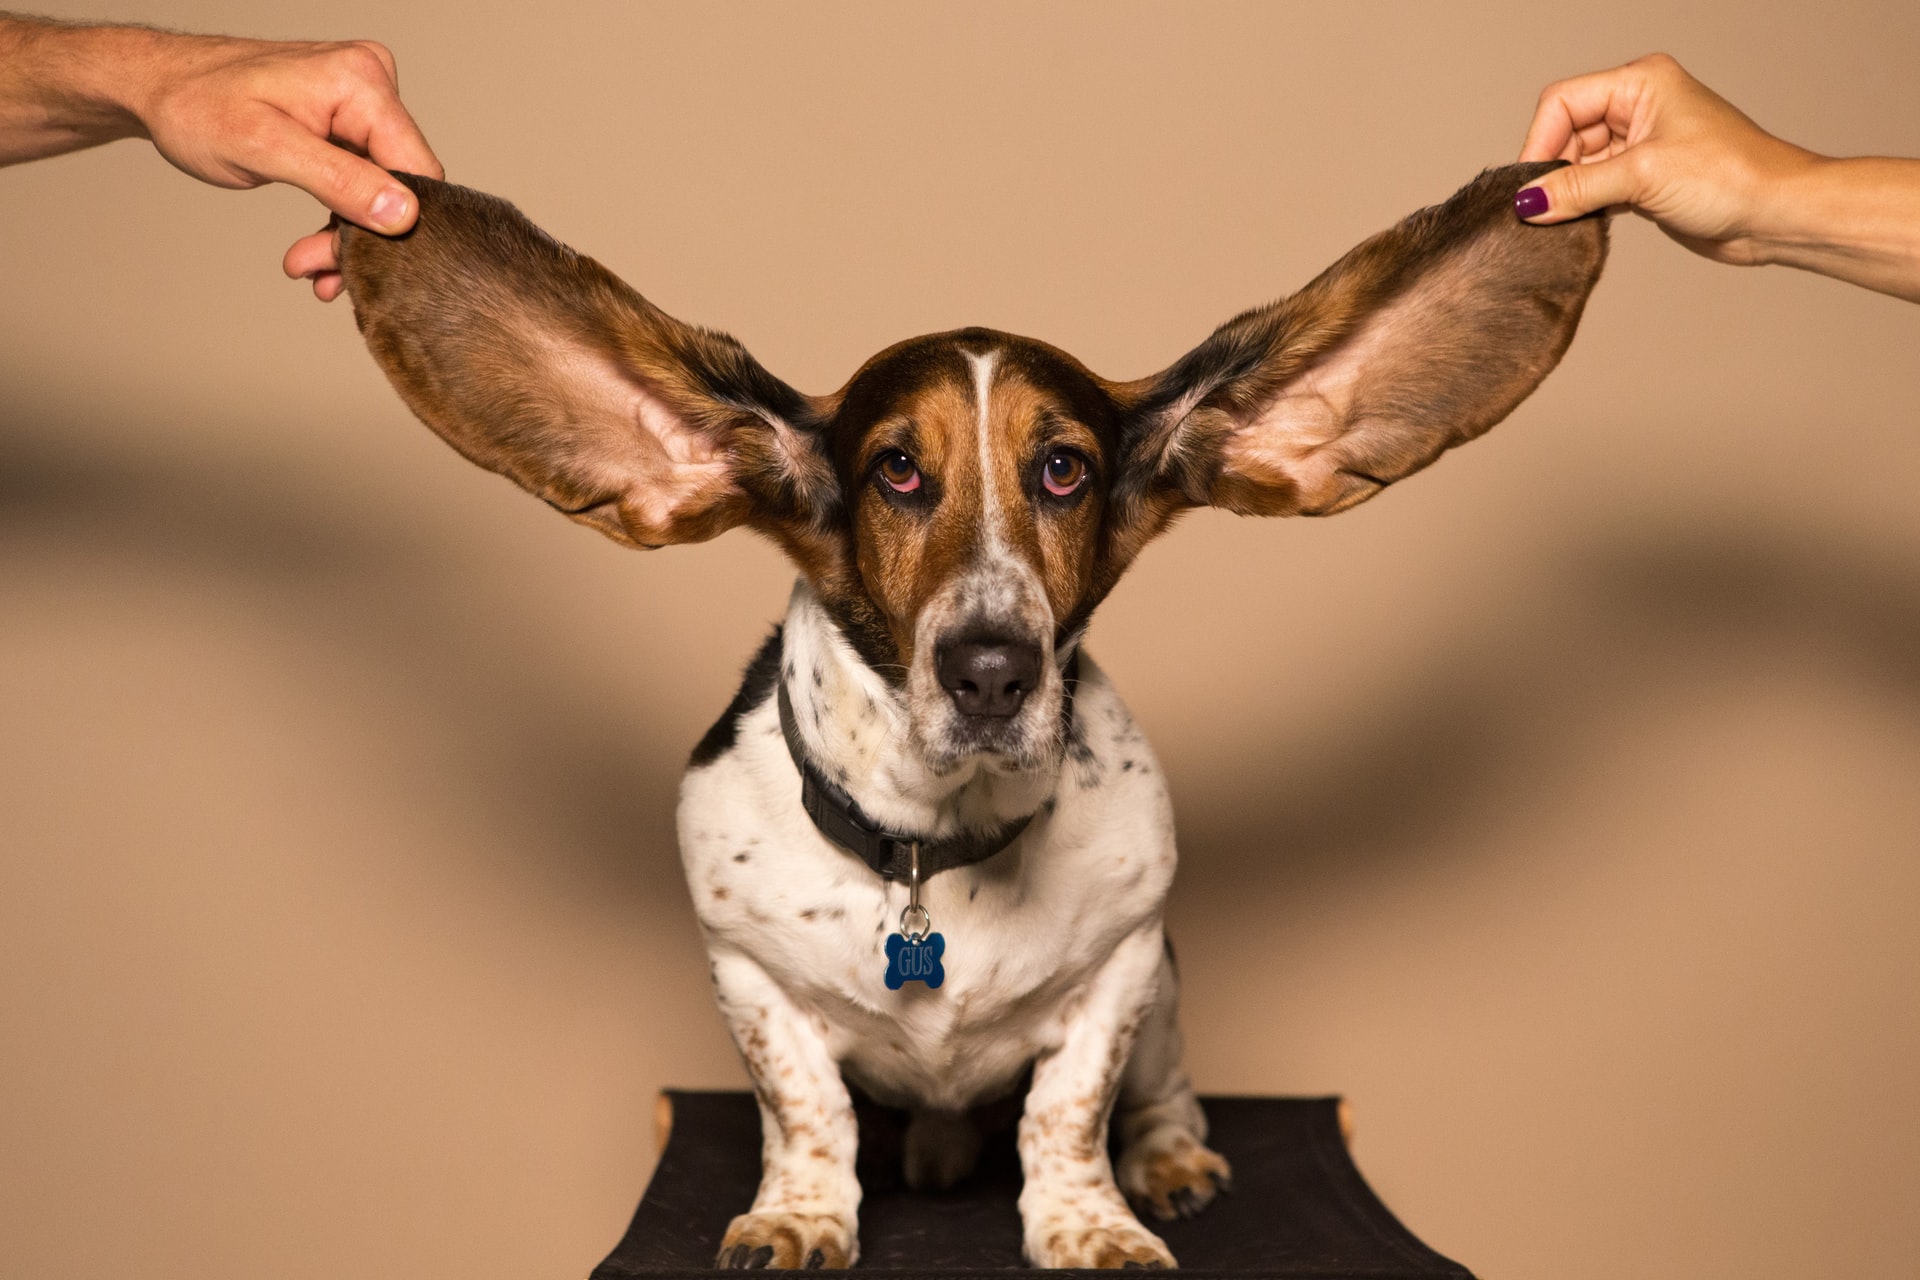 Basset hound with ears outstretched